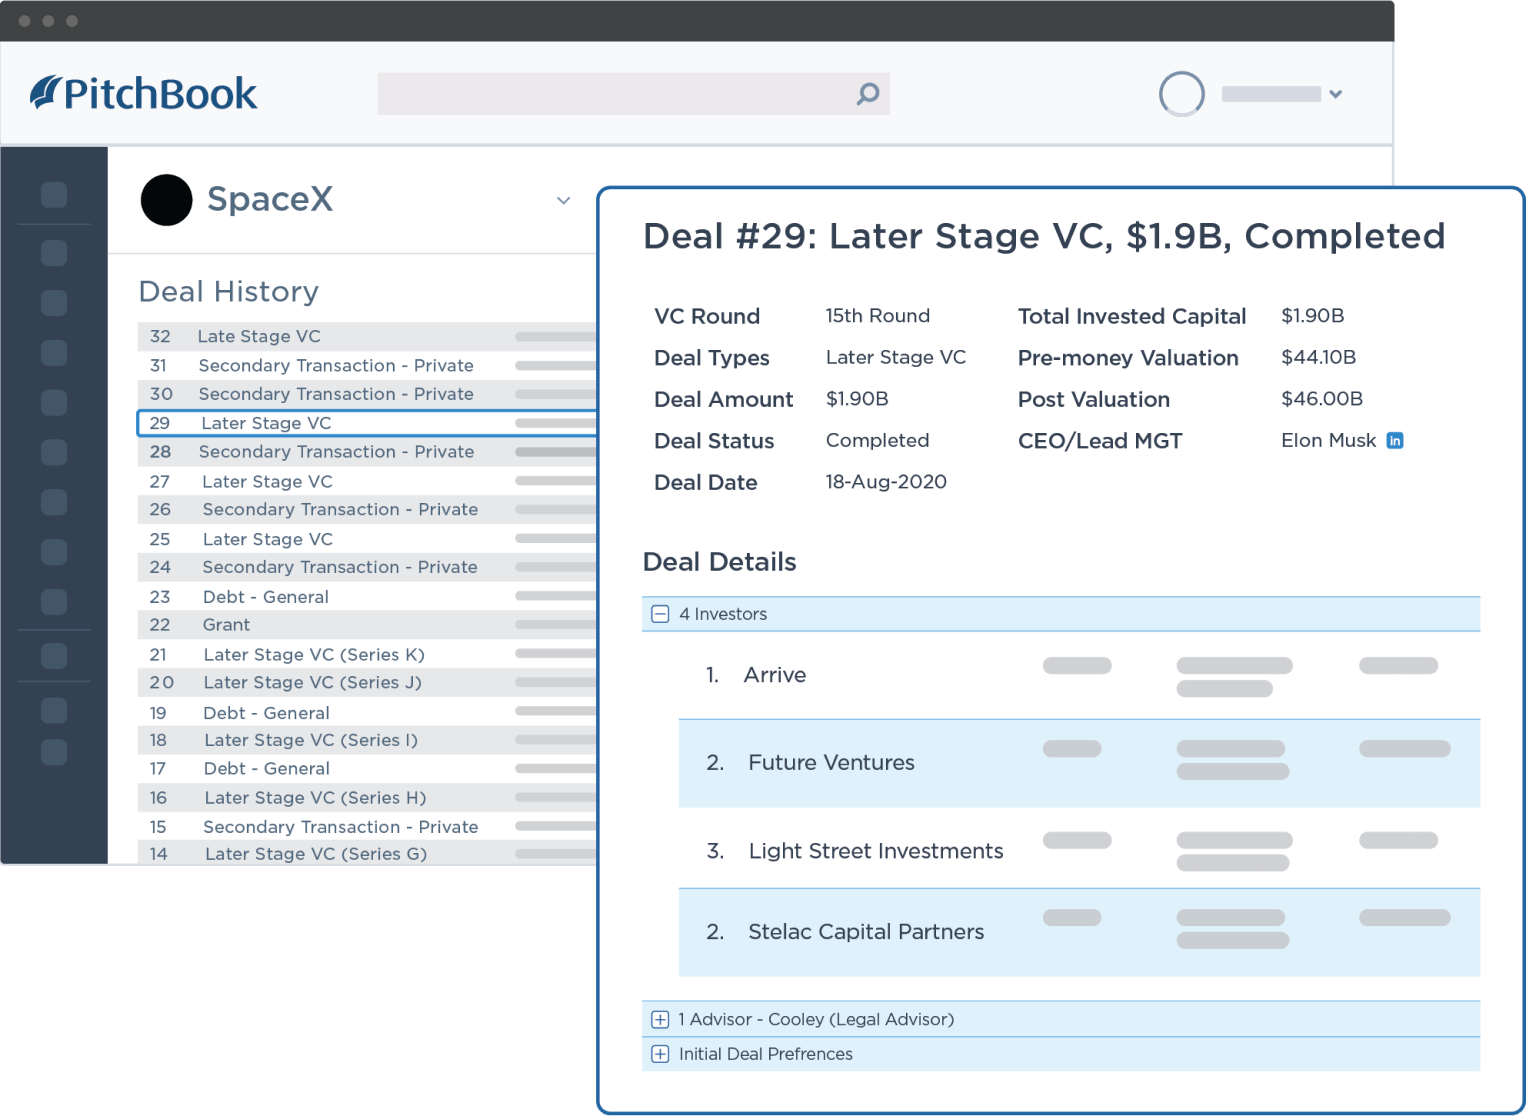 PitchBook's data on SpaceX's August 2020 $1.9B later stage VC deal including investors and advisors.